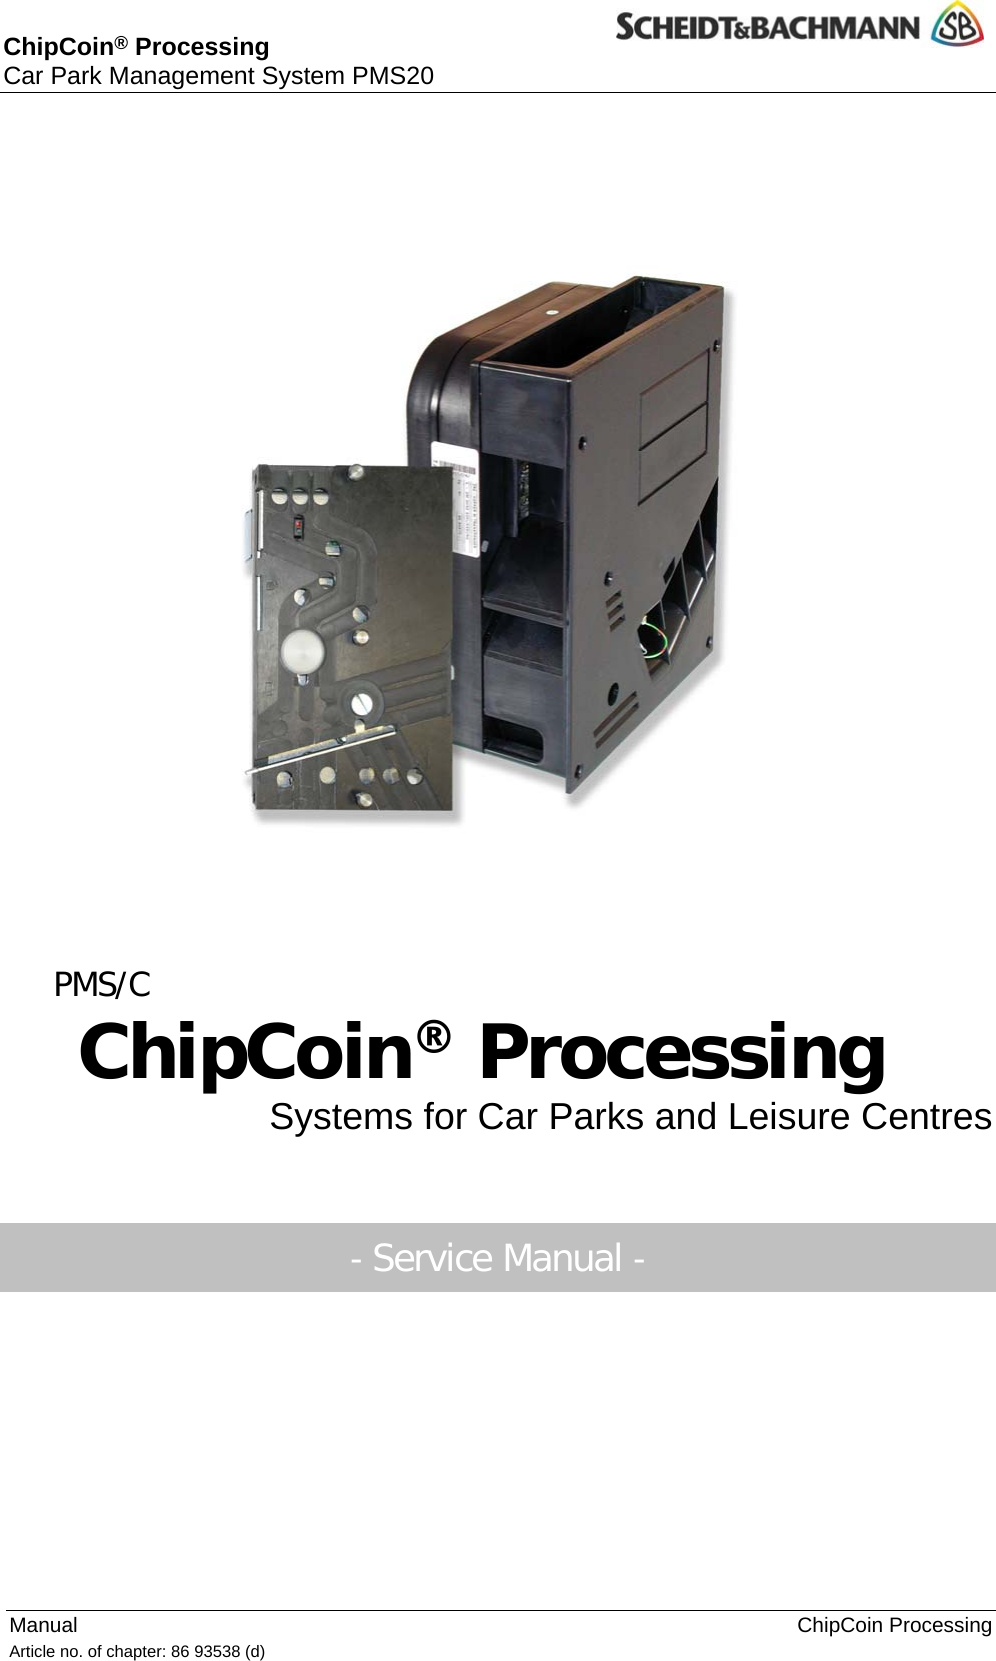  ChipCoin® Processing Car Park Management System PMS20  Manual    ChipCoin Processing       GmbH, Mönchengladbach (Germany) strations and descriptions may also include special options.    PMS/C ChipCoin® Processing Systems for Car Parks and Leisure Centres  Article no. of chapter: 86 93538 (d)   1 © 2004 by Scheidt &amp; Bachmann All rights reserverd. Subject to alterations. Some Illu  - Service Manual -  